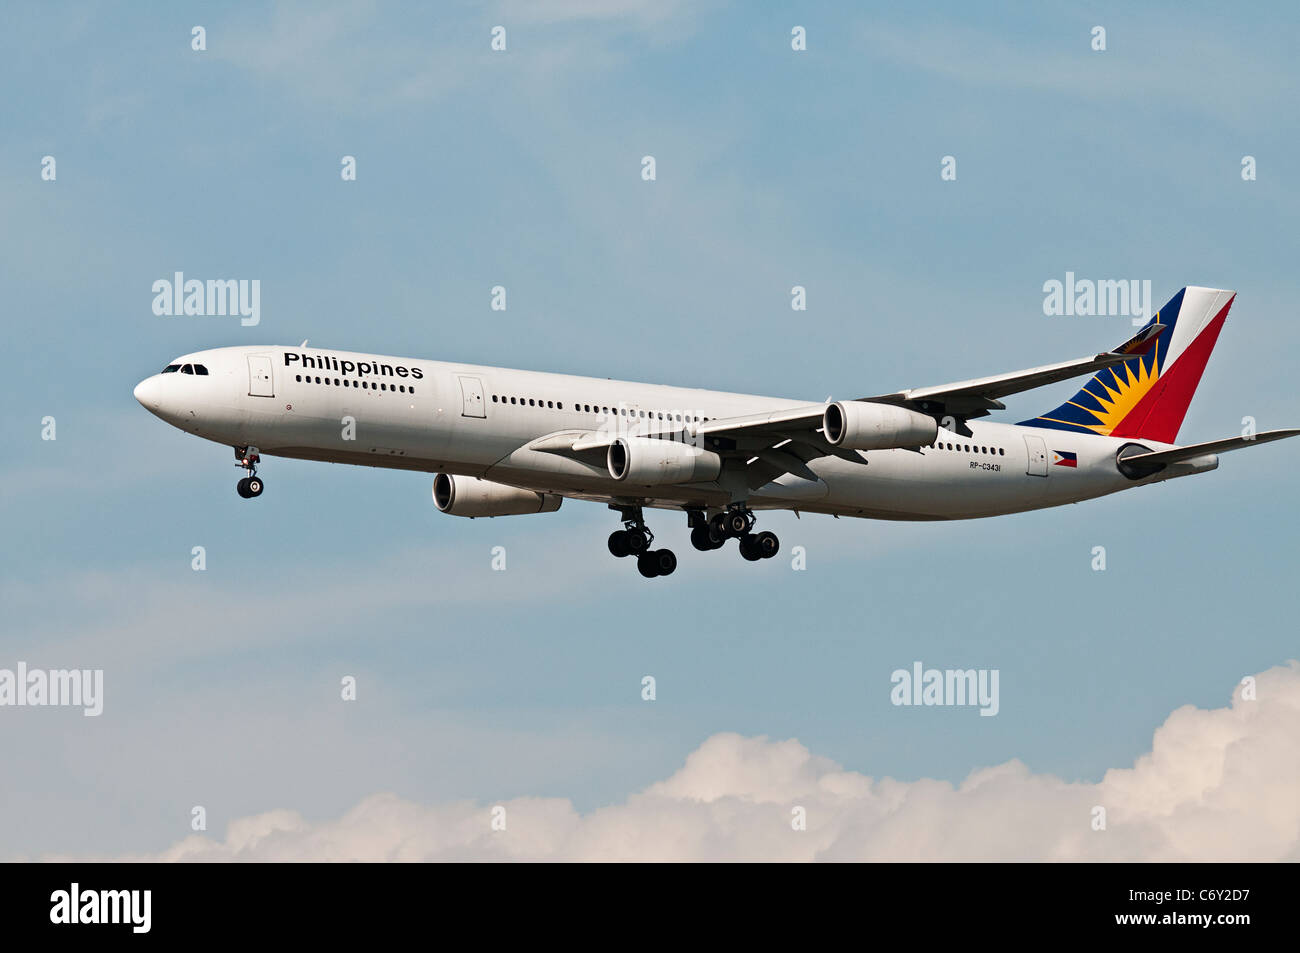 A Philippine Airlines Airbus A340 (A340-313X) jet airliner on final approach for landing at Vancouver International Airport. Stock Photo